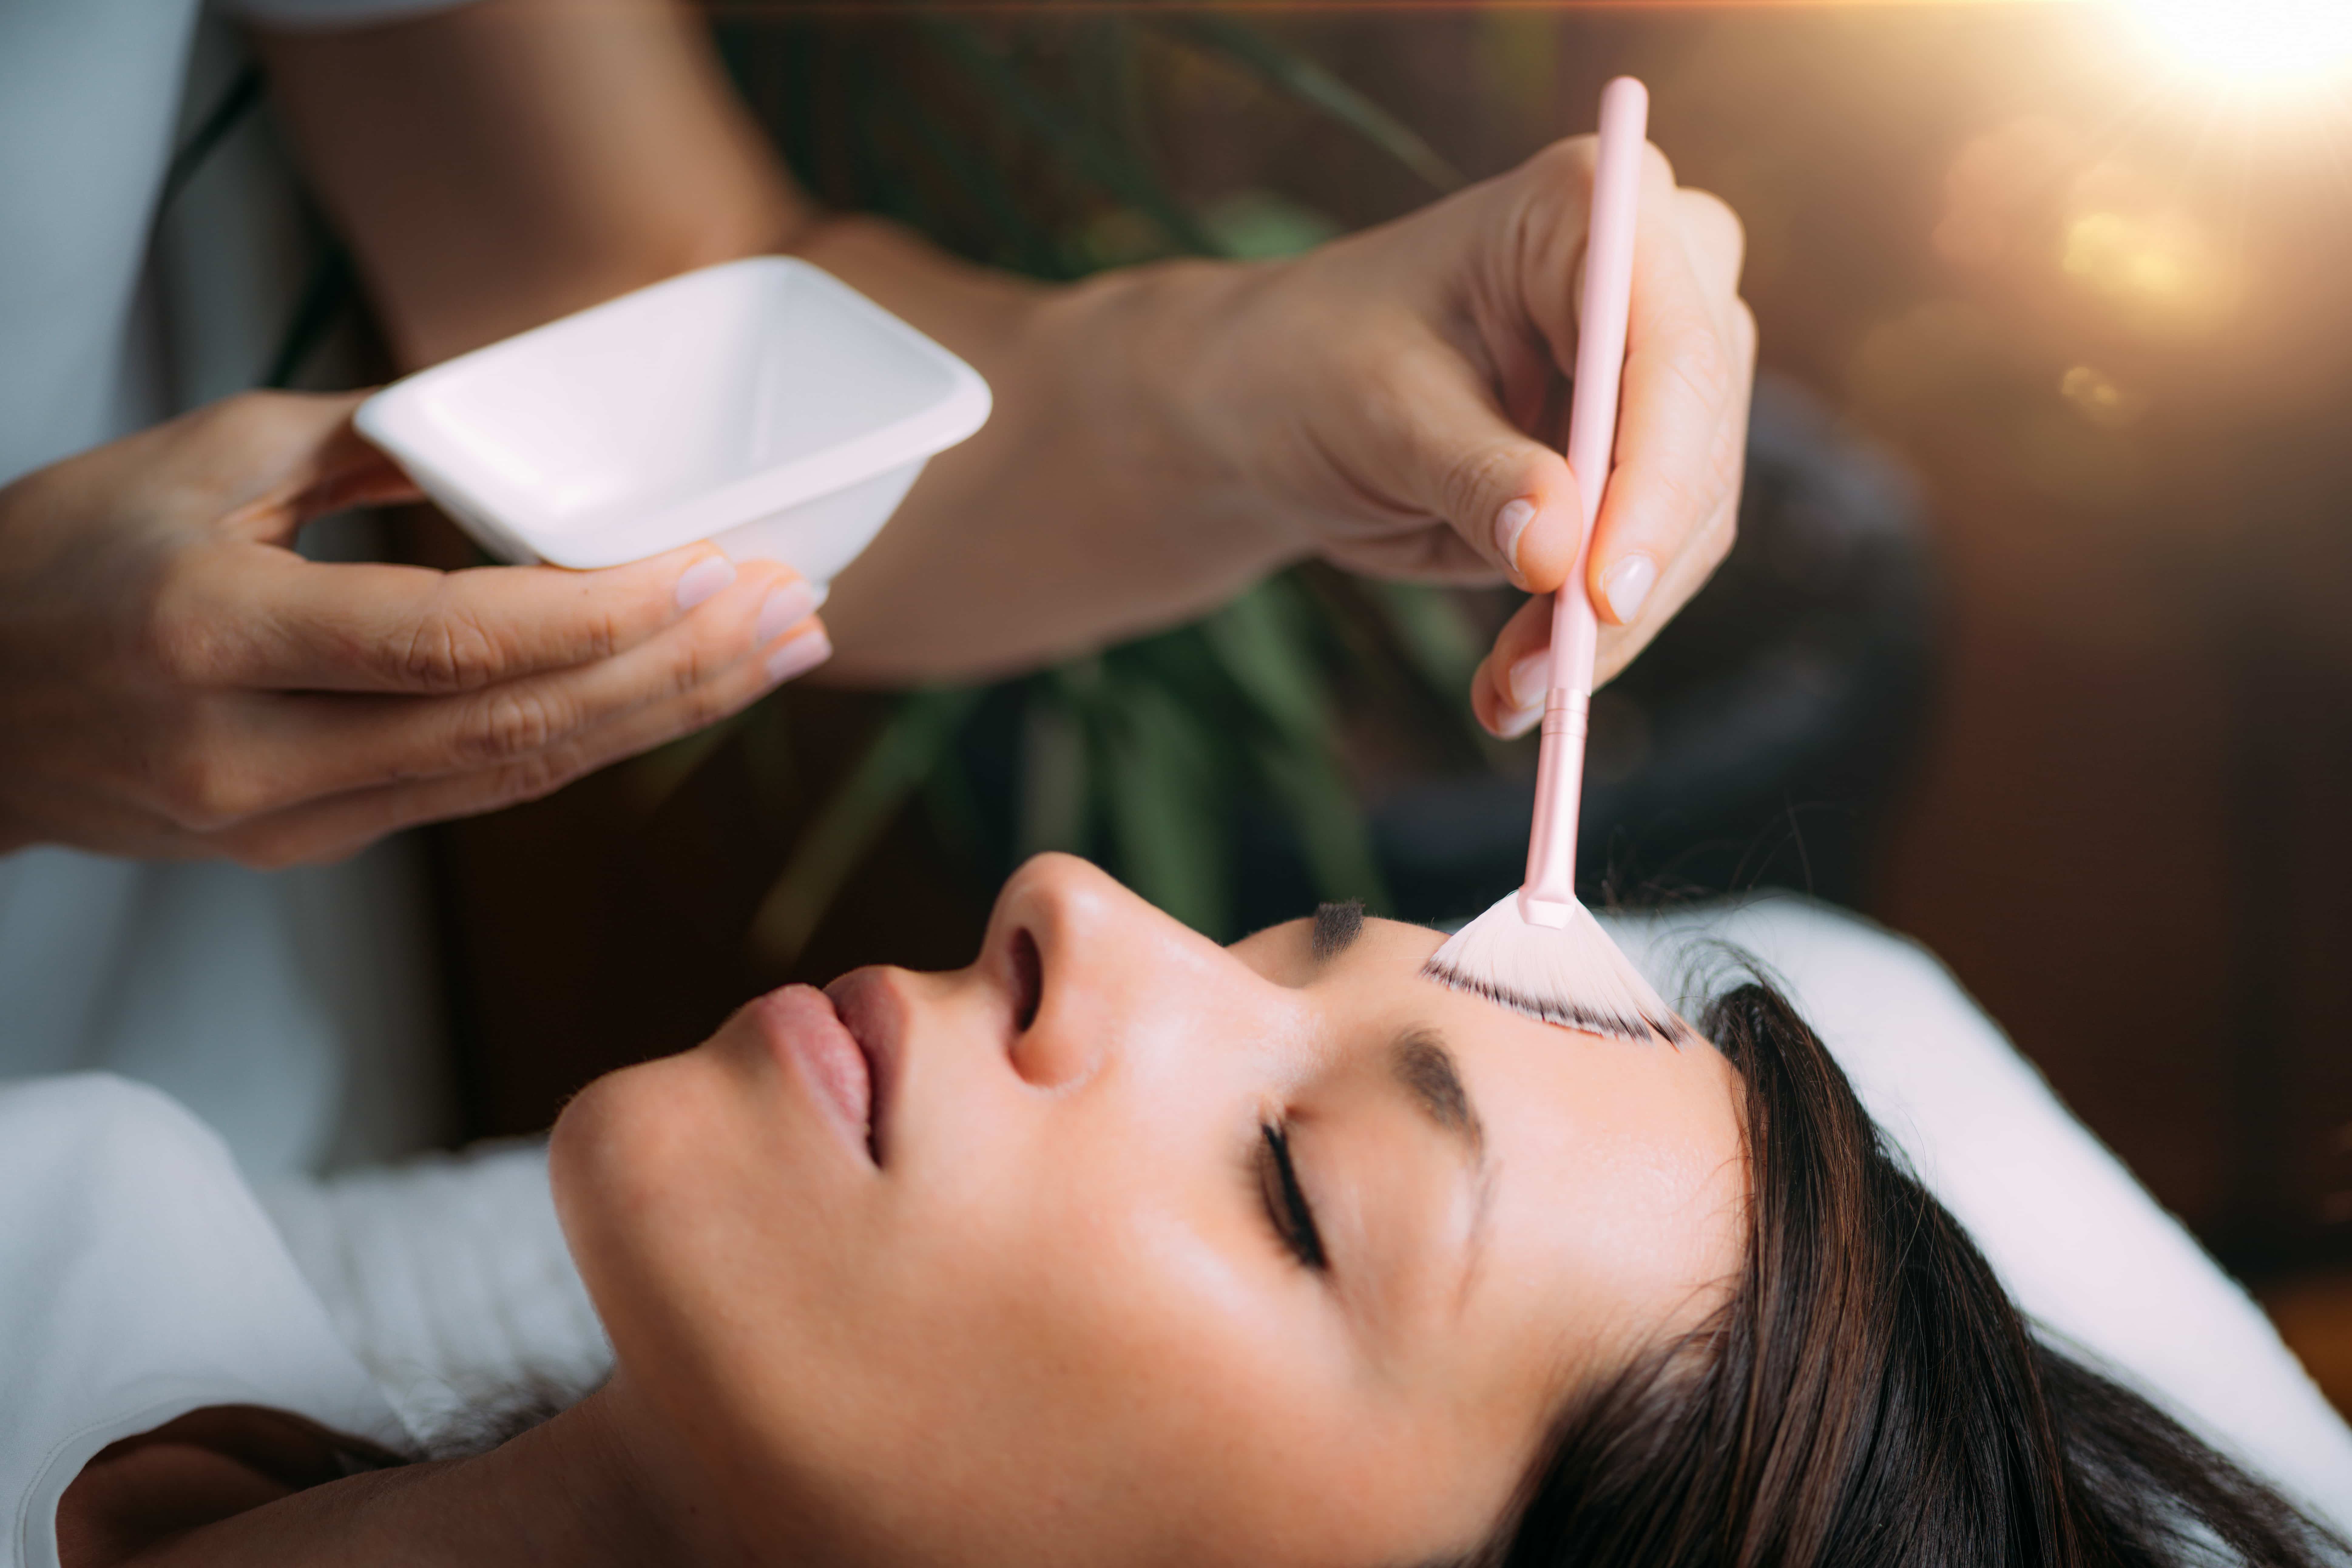 How Do You Take Care of your Face after a Chemical Peel?